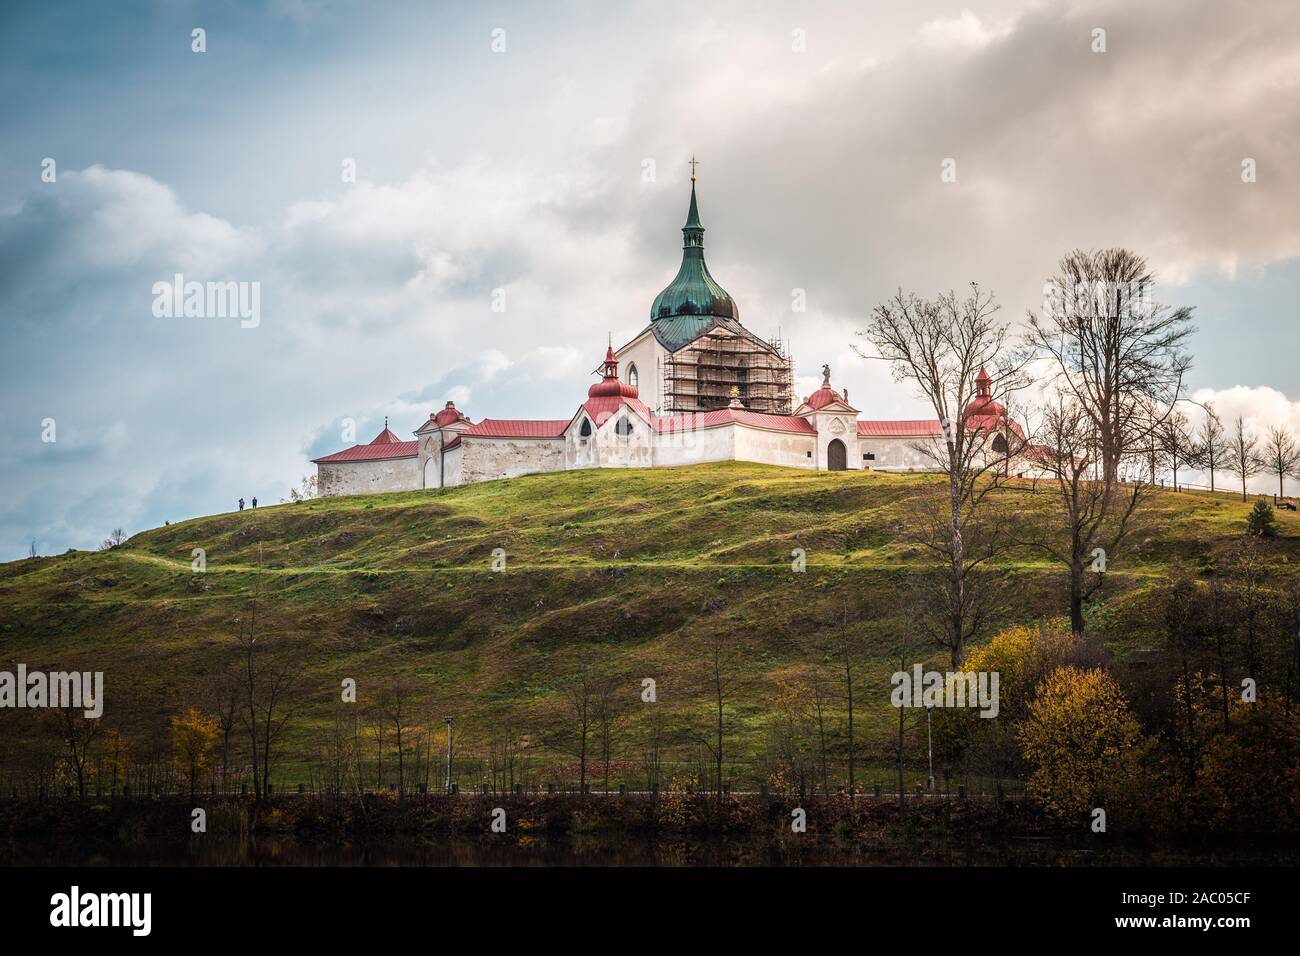 The pilgrimag church on Zelena Hora - Green Hill - Monument UNESCO. St. Jan Nepomucky Church panorama in autumn scene with reflection in the lake Stock Photo